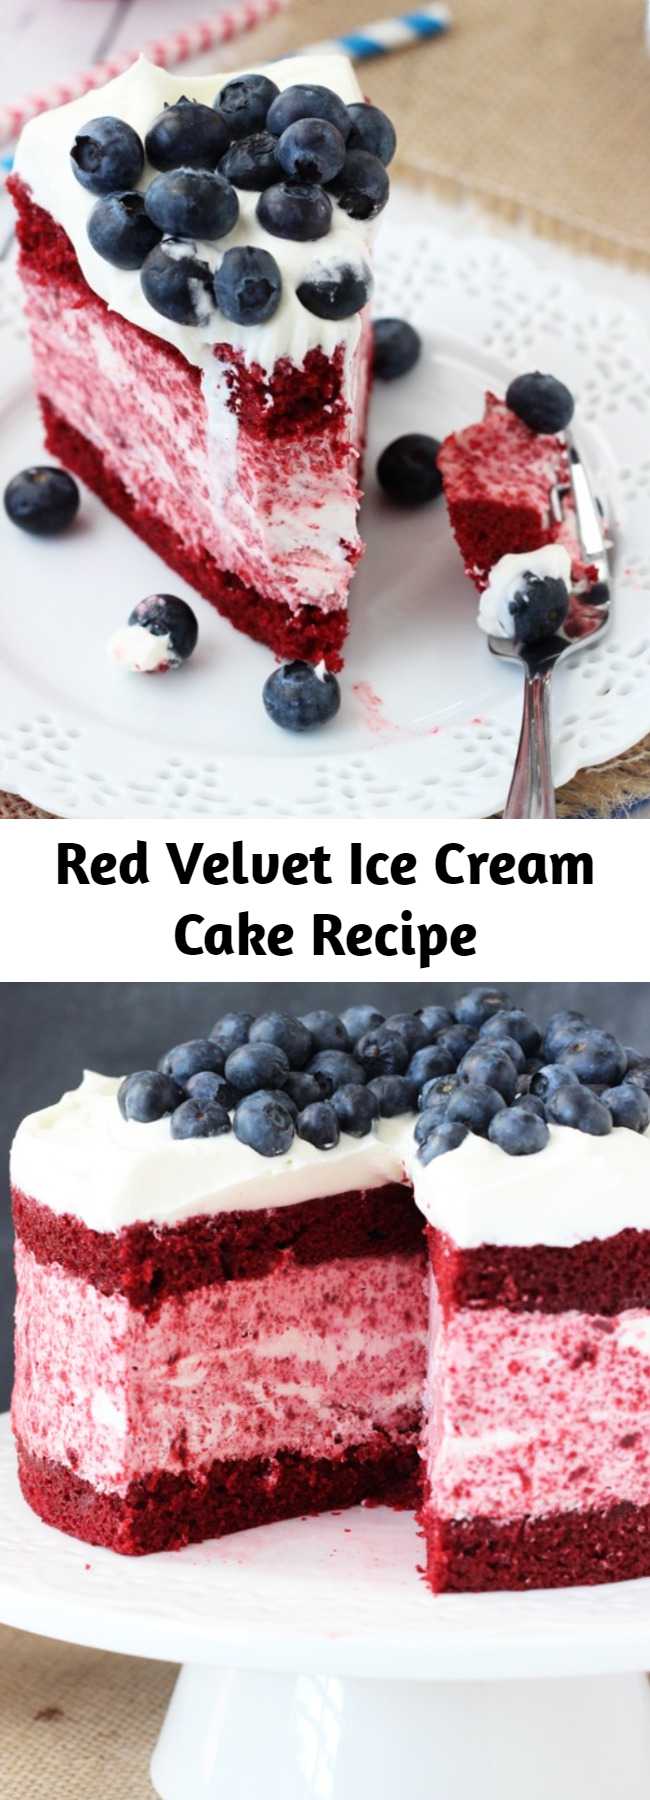 Red Velvet Ice Cream Cake Recipe - This Red Velvet Ice Cream Cake might just be my new favorite cake, period. I couldn’t decide if I want to give it all away so that I couldn’t eat it all or just give in and eat it every last bite. The longer it stayed in the house, the more I ate.